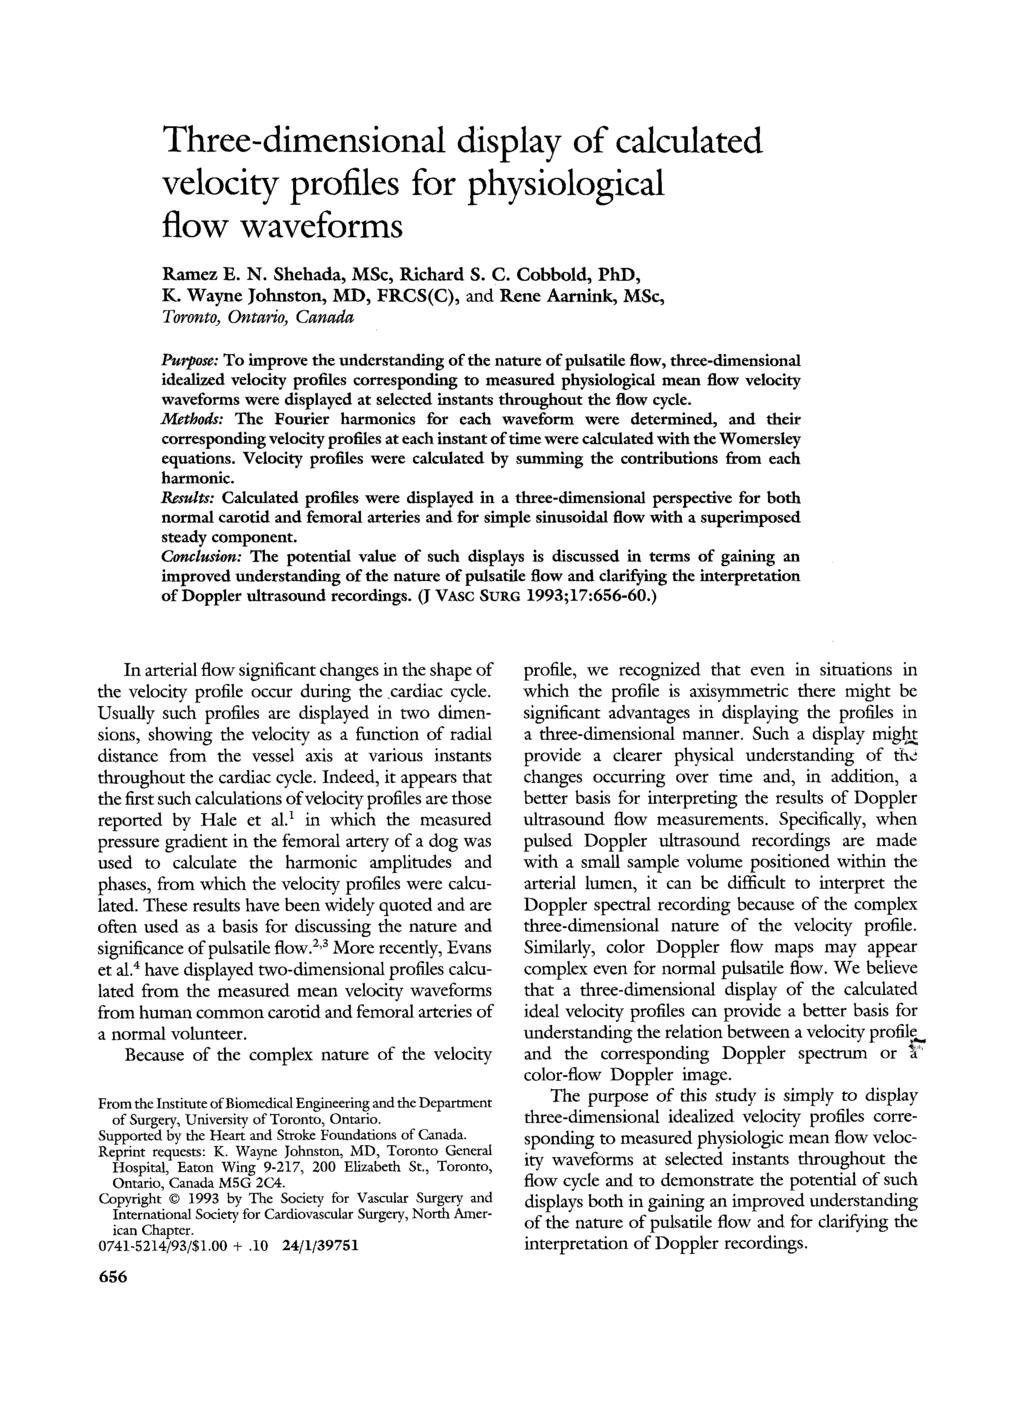 Three-dimensional display of calculated velocity profiles for physiological flow waveforms Ramez E. N. Shehada, MSc, Richard S. C. Cobbold, Phi), K.